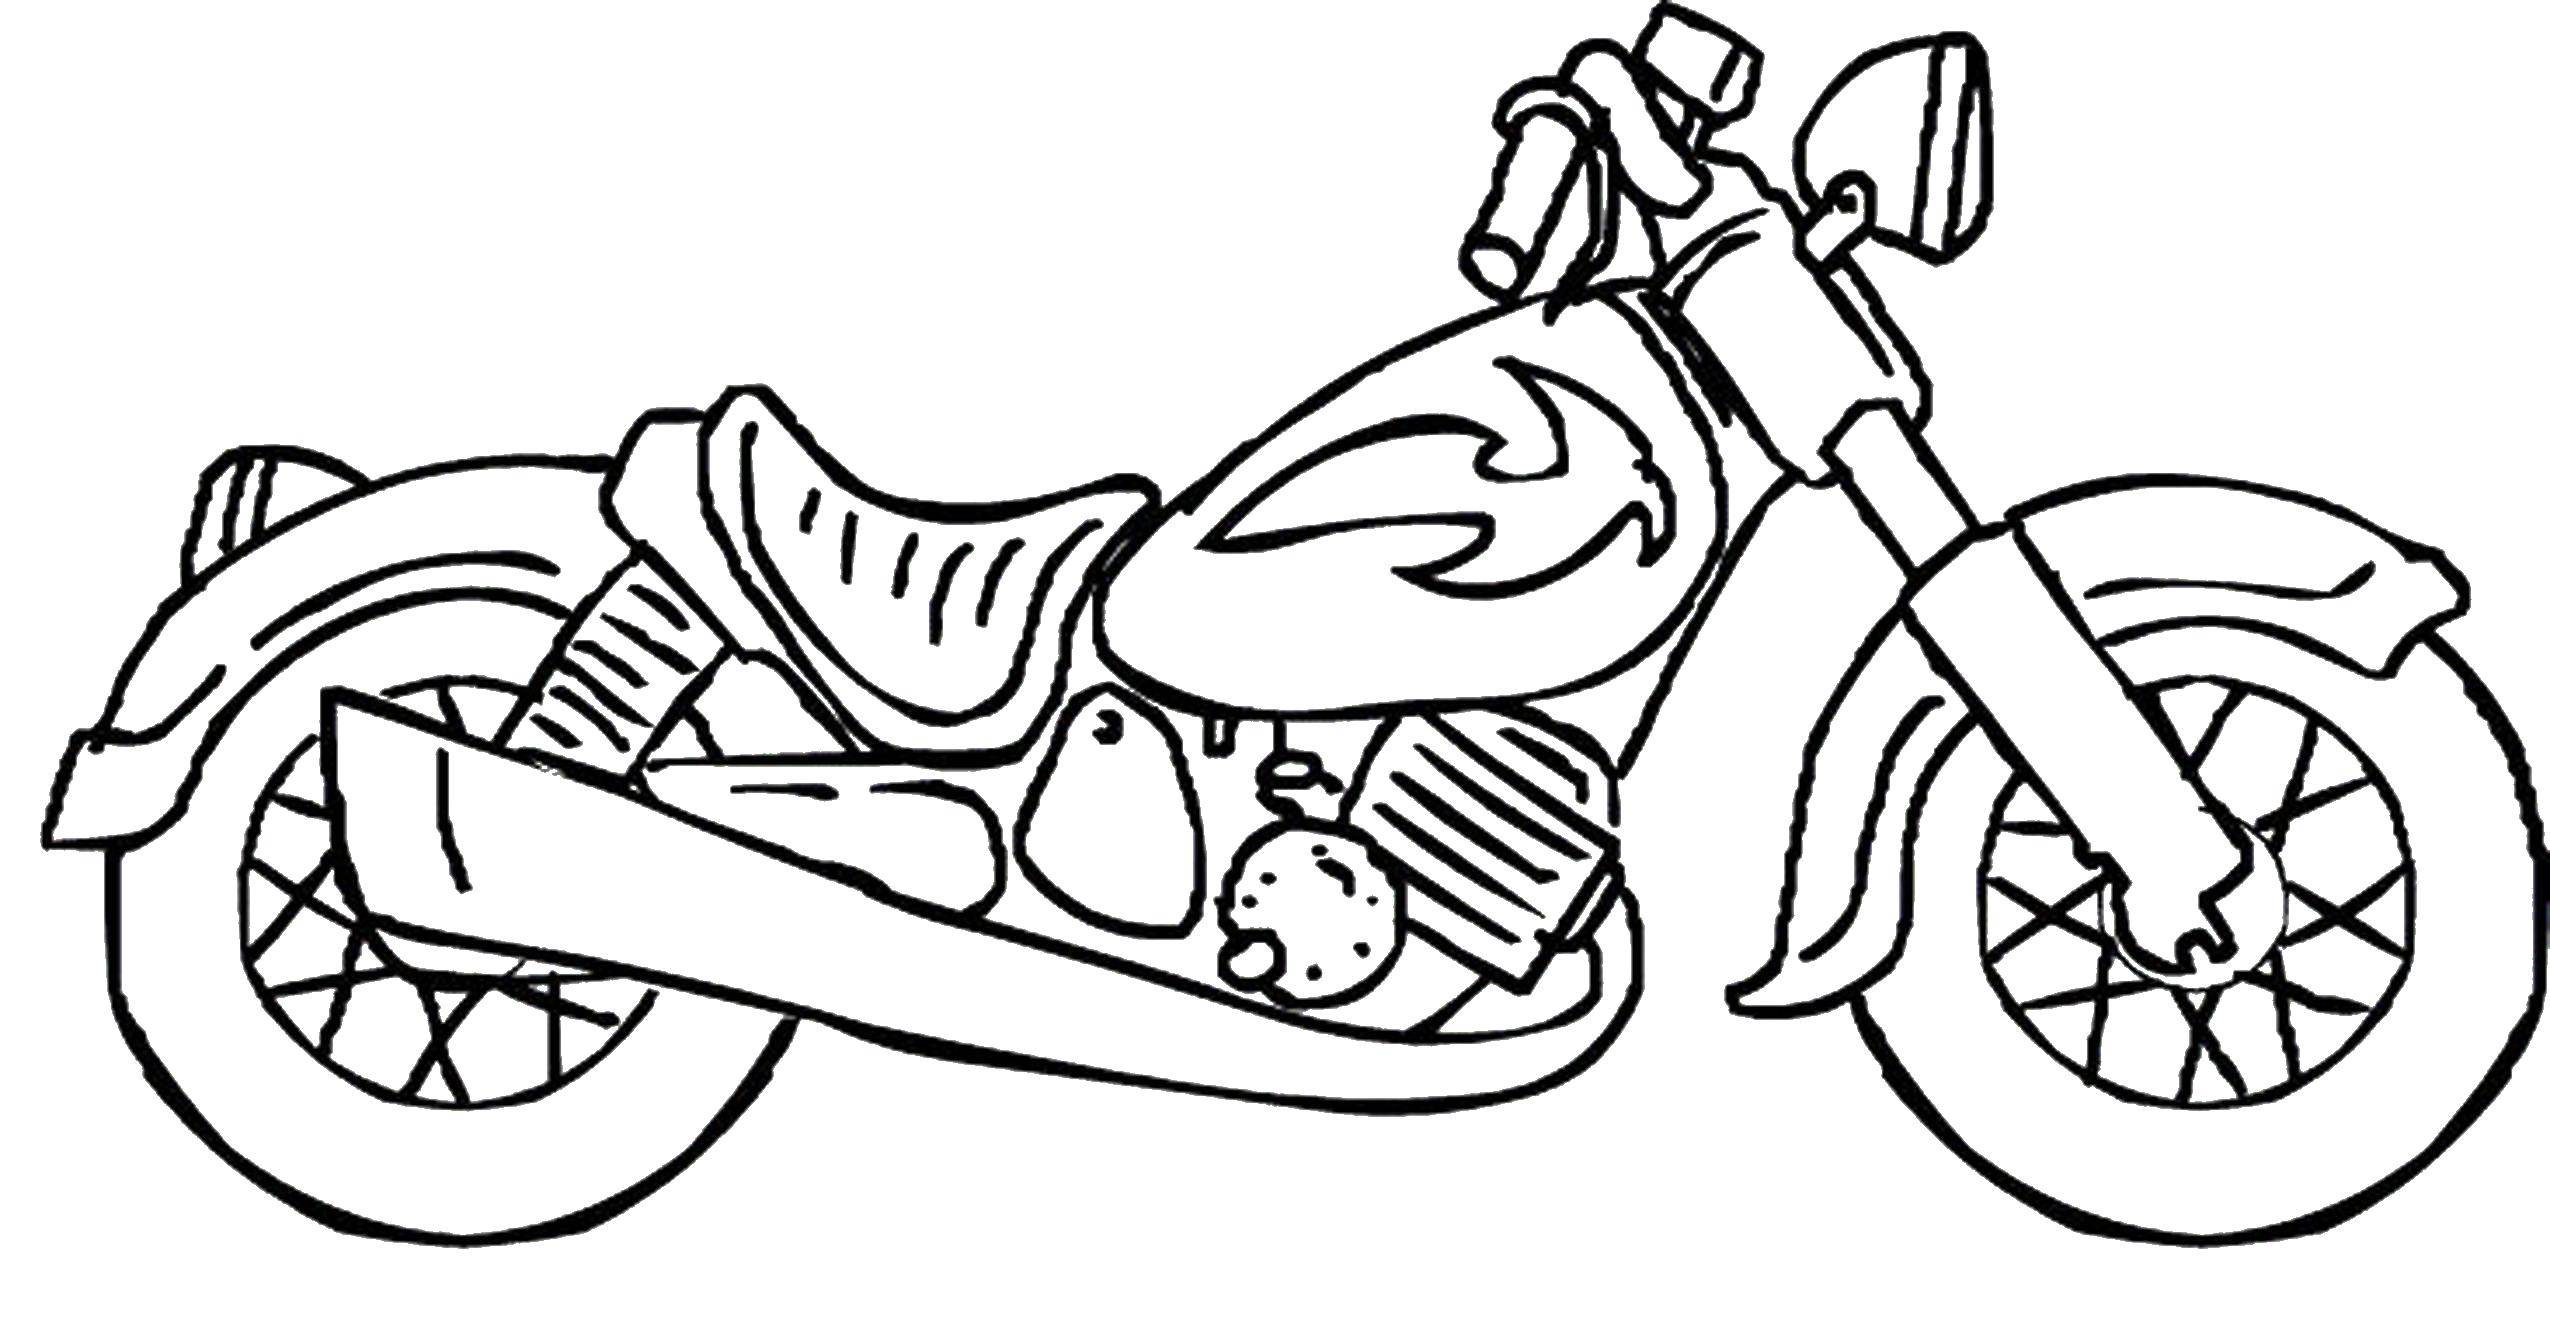 Coloring Motorcycle. Category machine . Tags:  motorcycle.